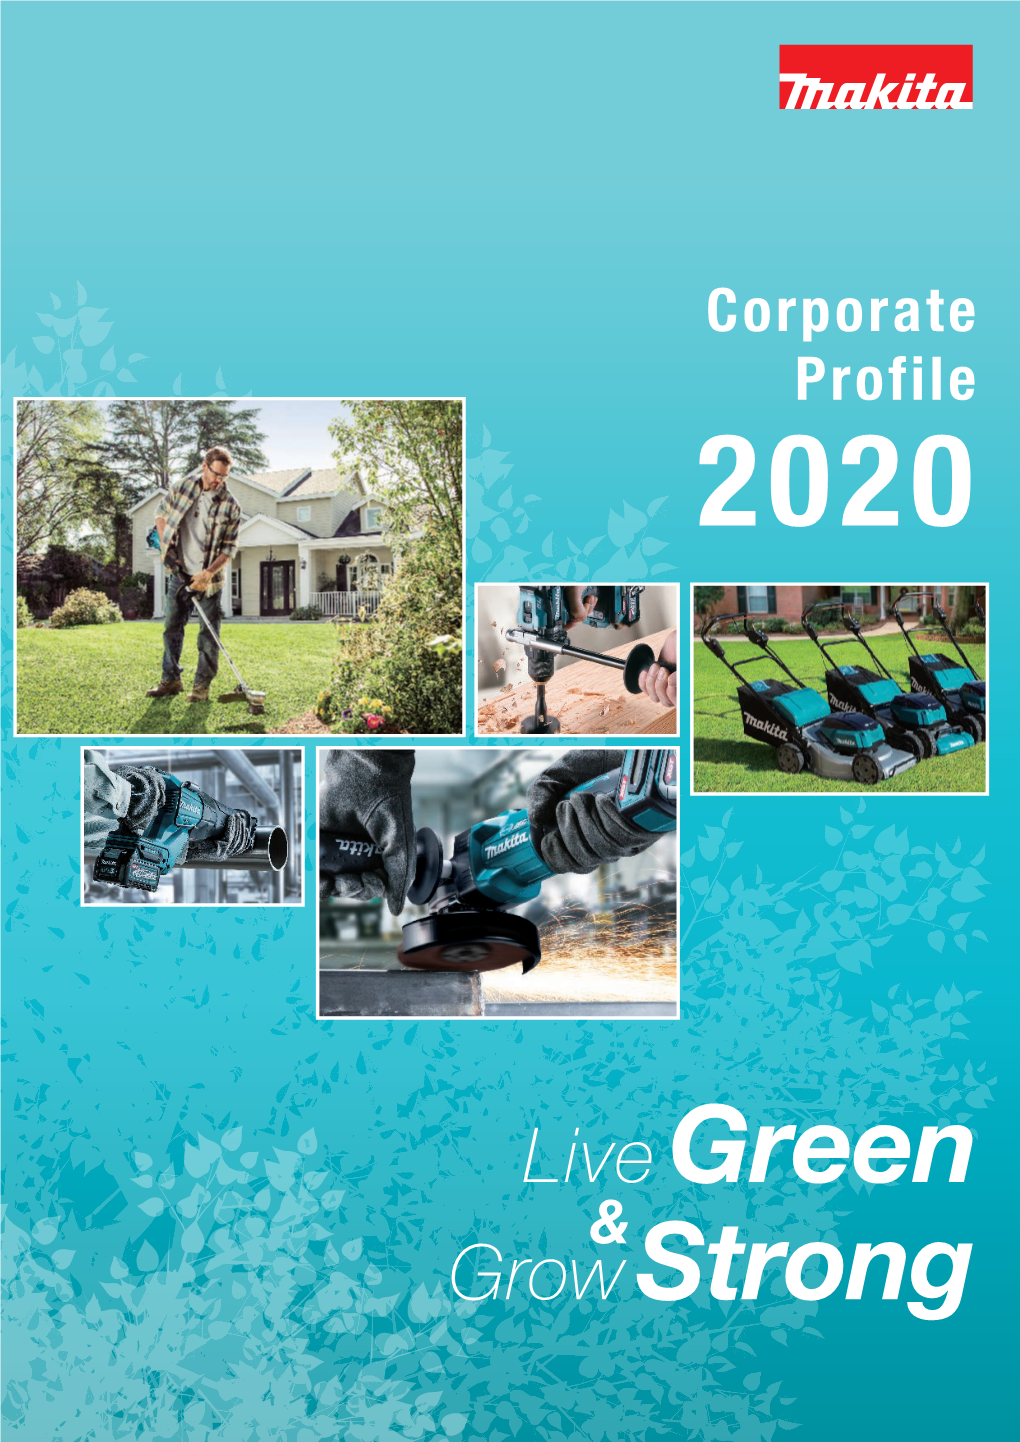 Corporate Profile 2020 Strive to Become a “Strong Company” Contributing to Reducing the Burden on Workplaces Around the World and on the Global Environment